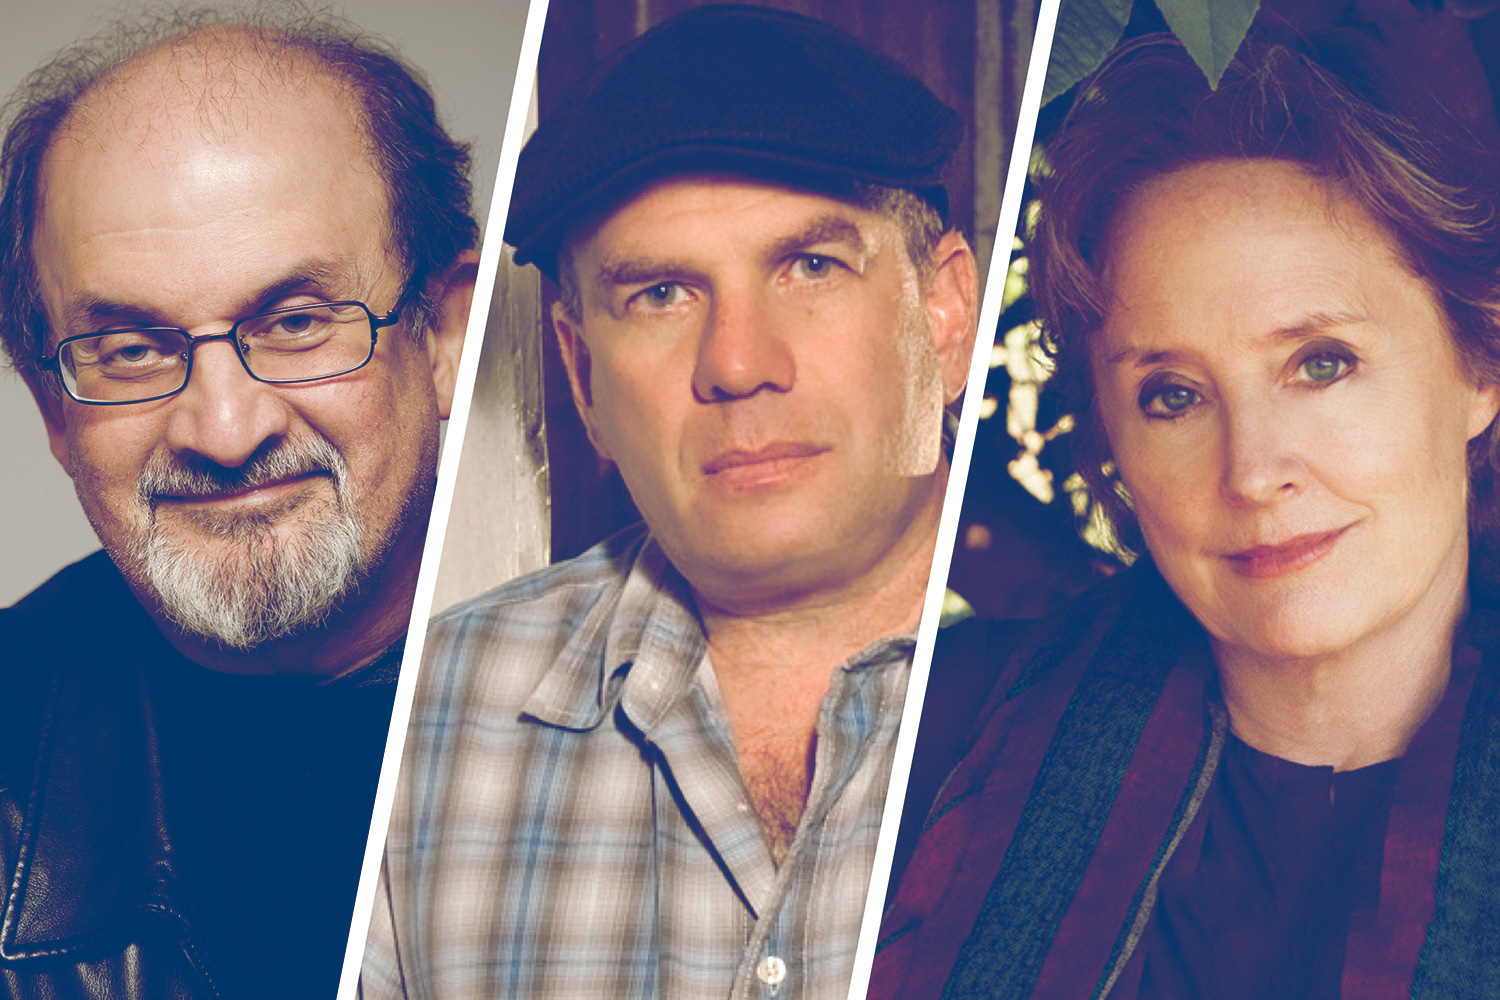 Author Salman Rushdie, Emmy-winning writer and producer David Simon and celebrated chef Alice Waters headline the humanities celebration being held at UVA this month.